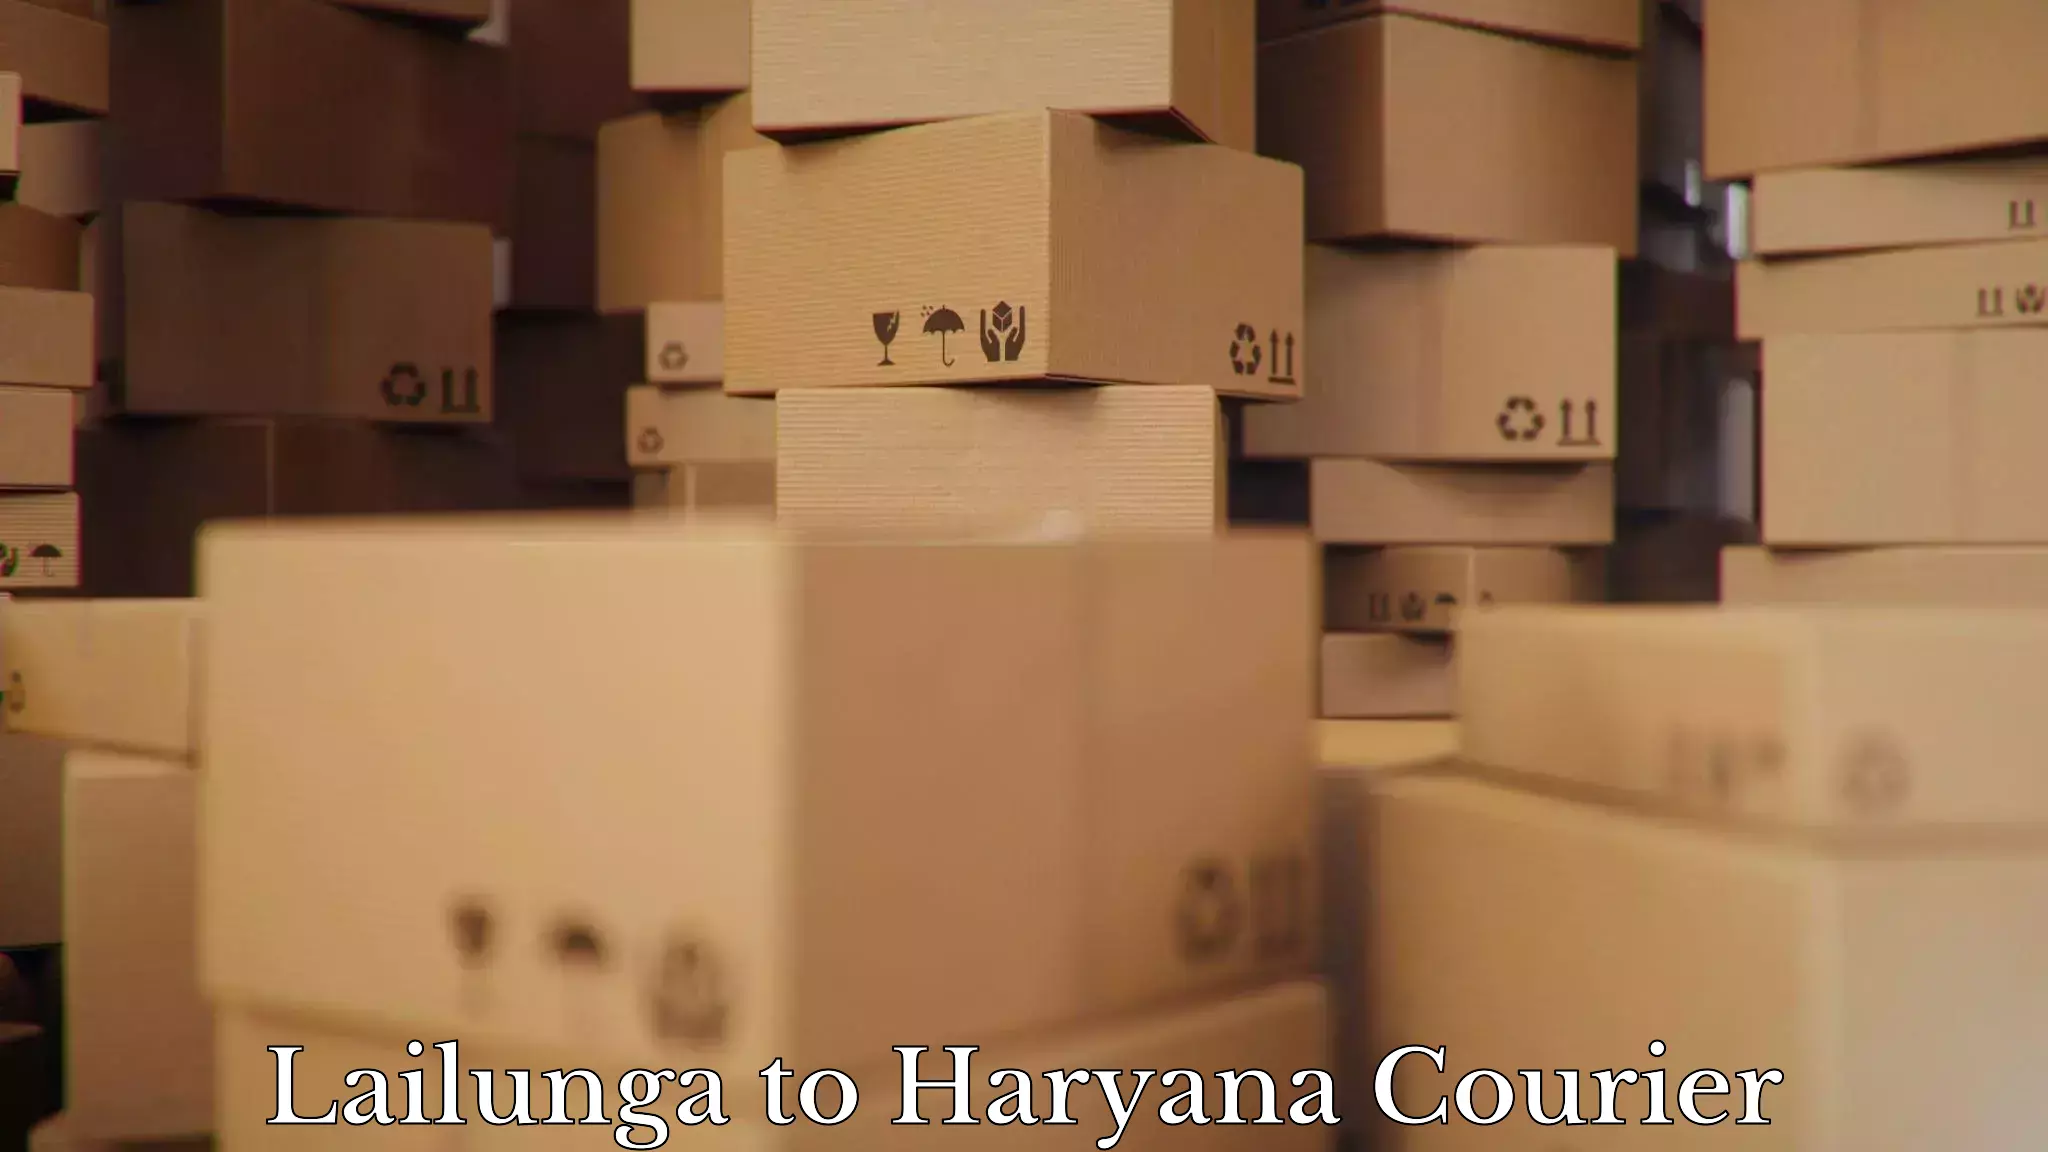 Professional packing services Lailunga to Haryana